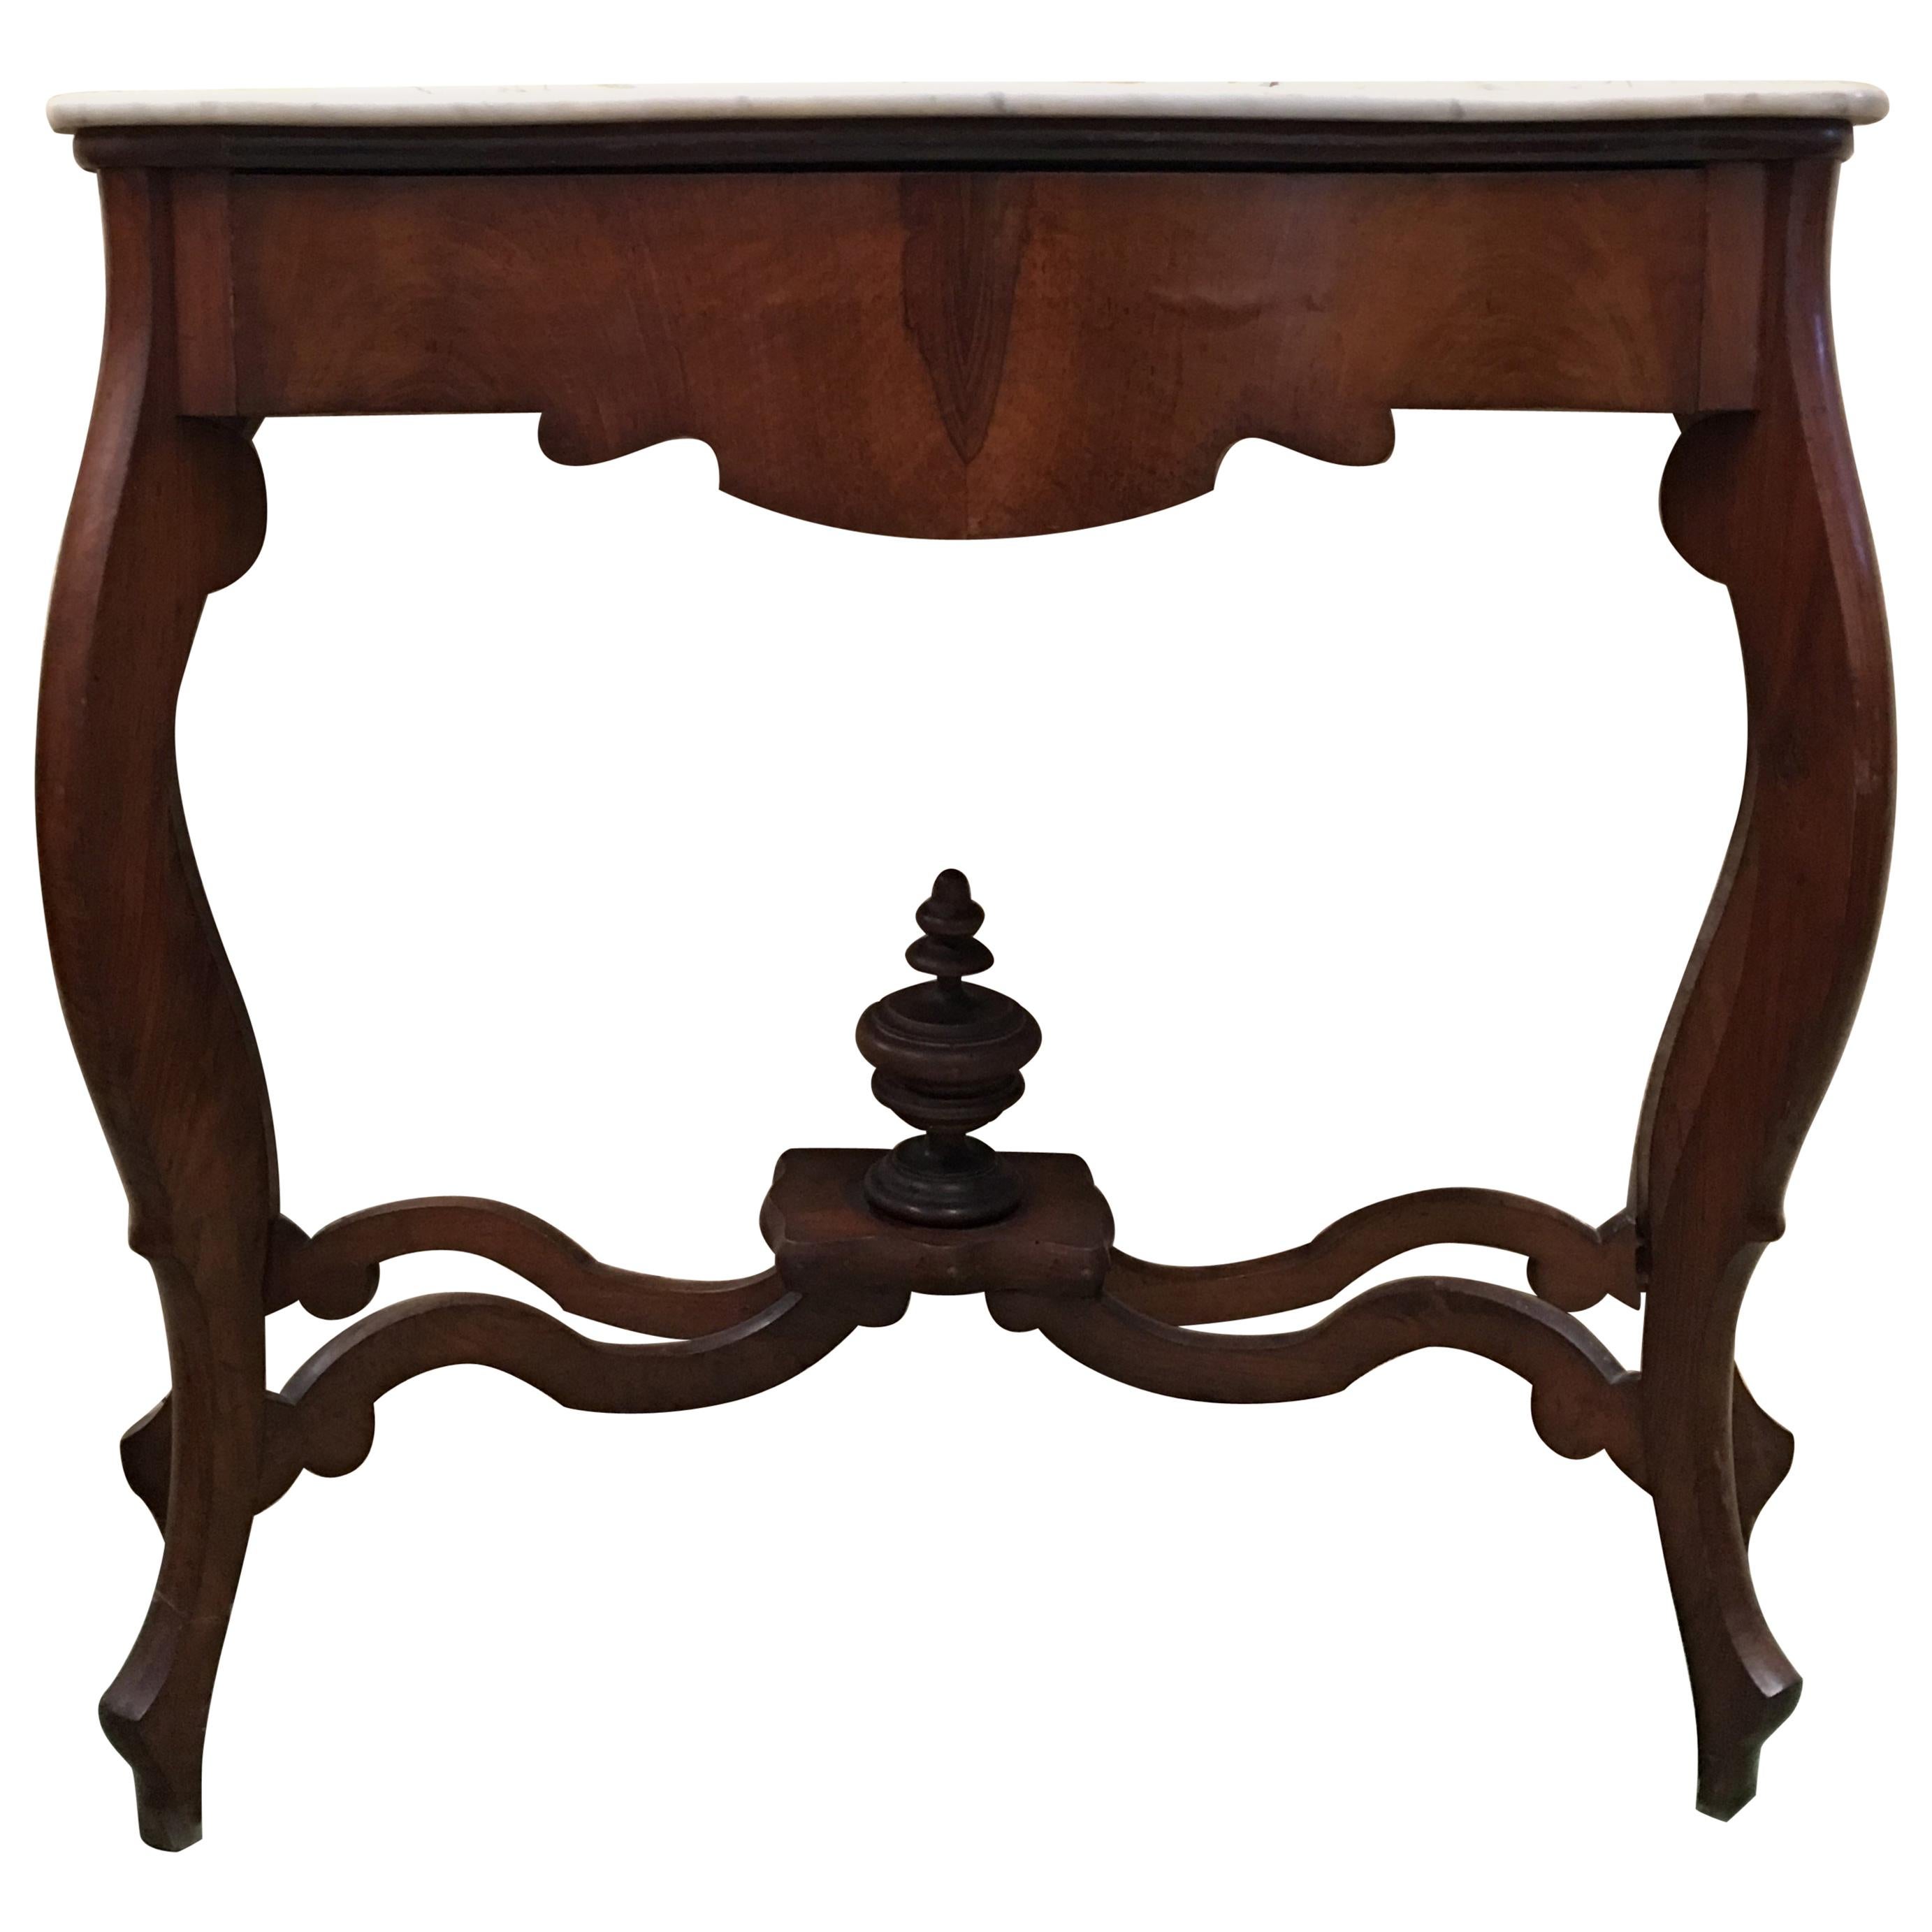 20th Century Marble Top Walnut Console Table with Drawer